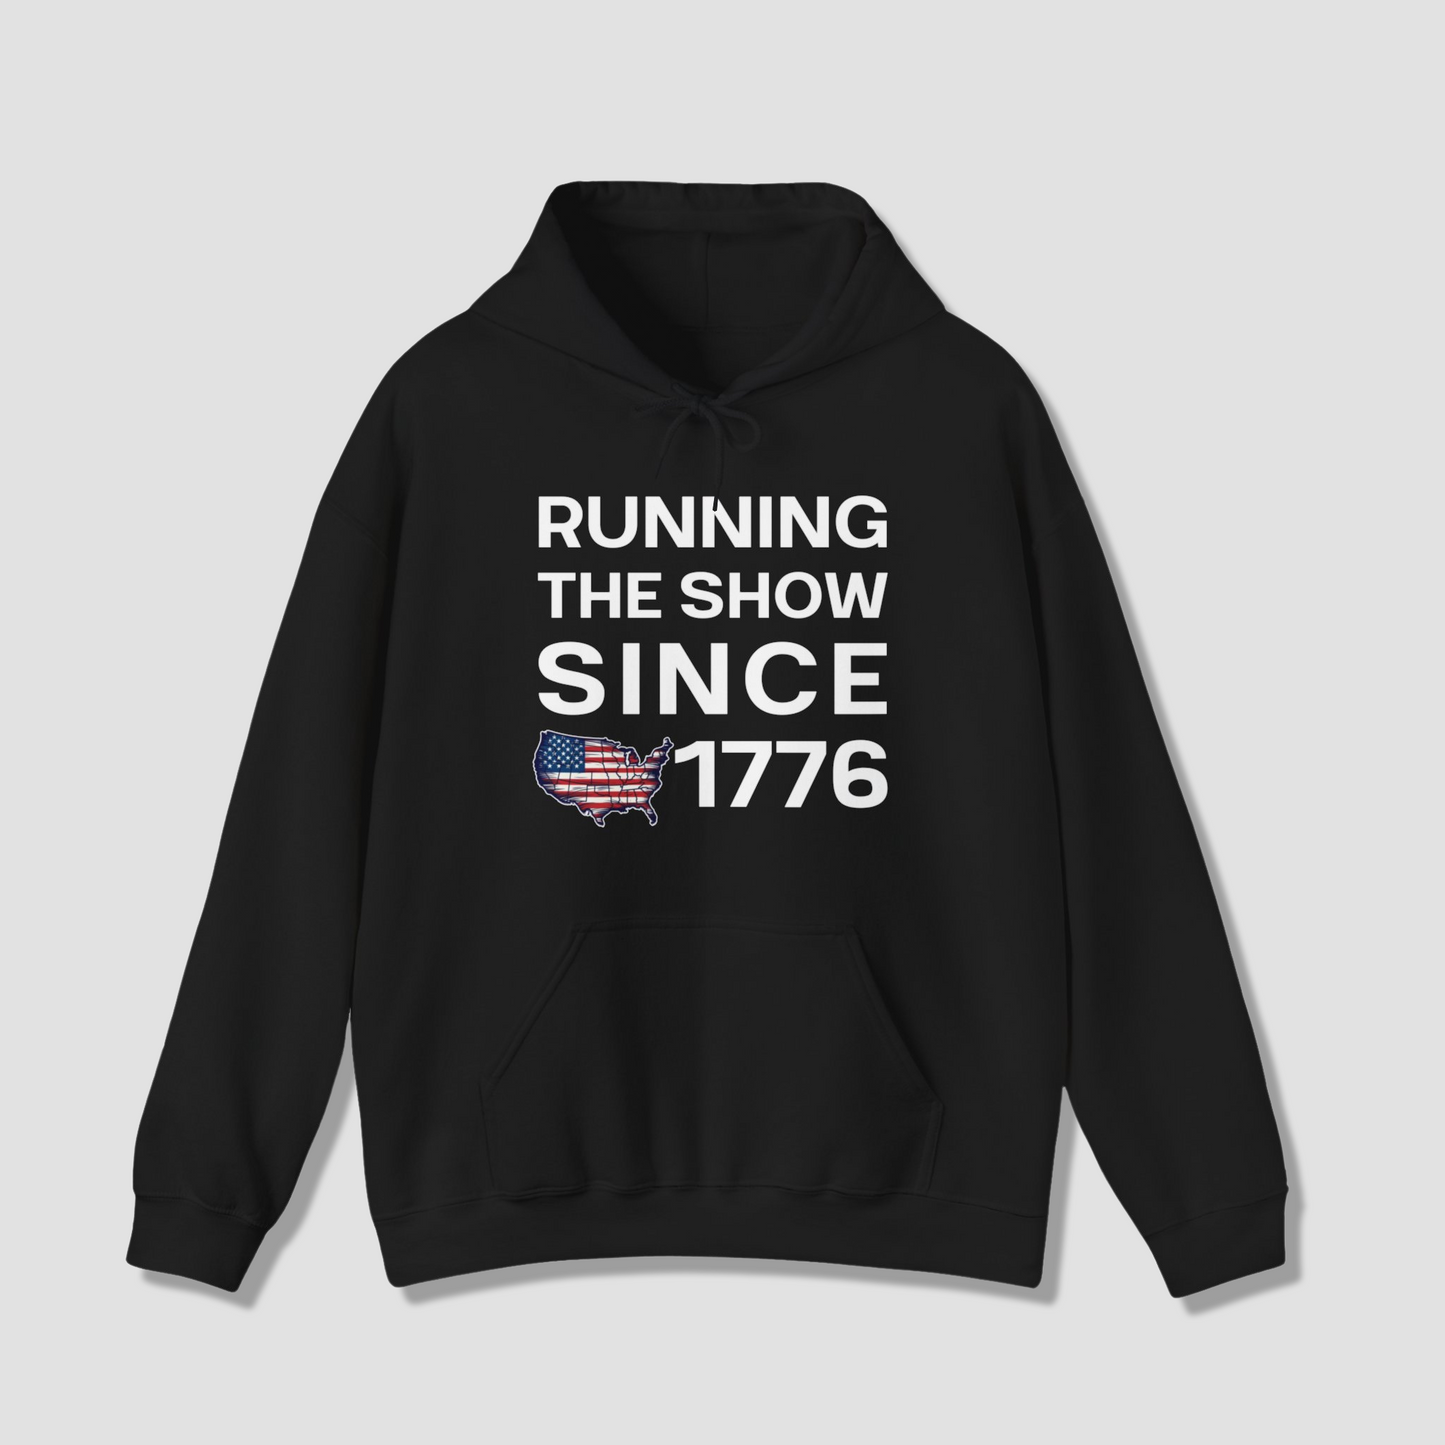 Running the Show Since 1776 Hoodie